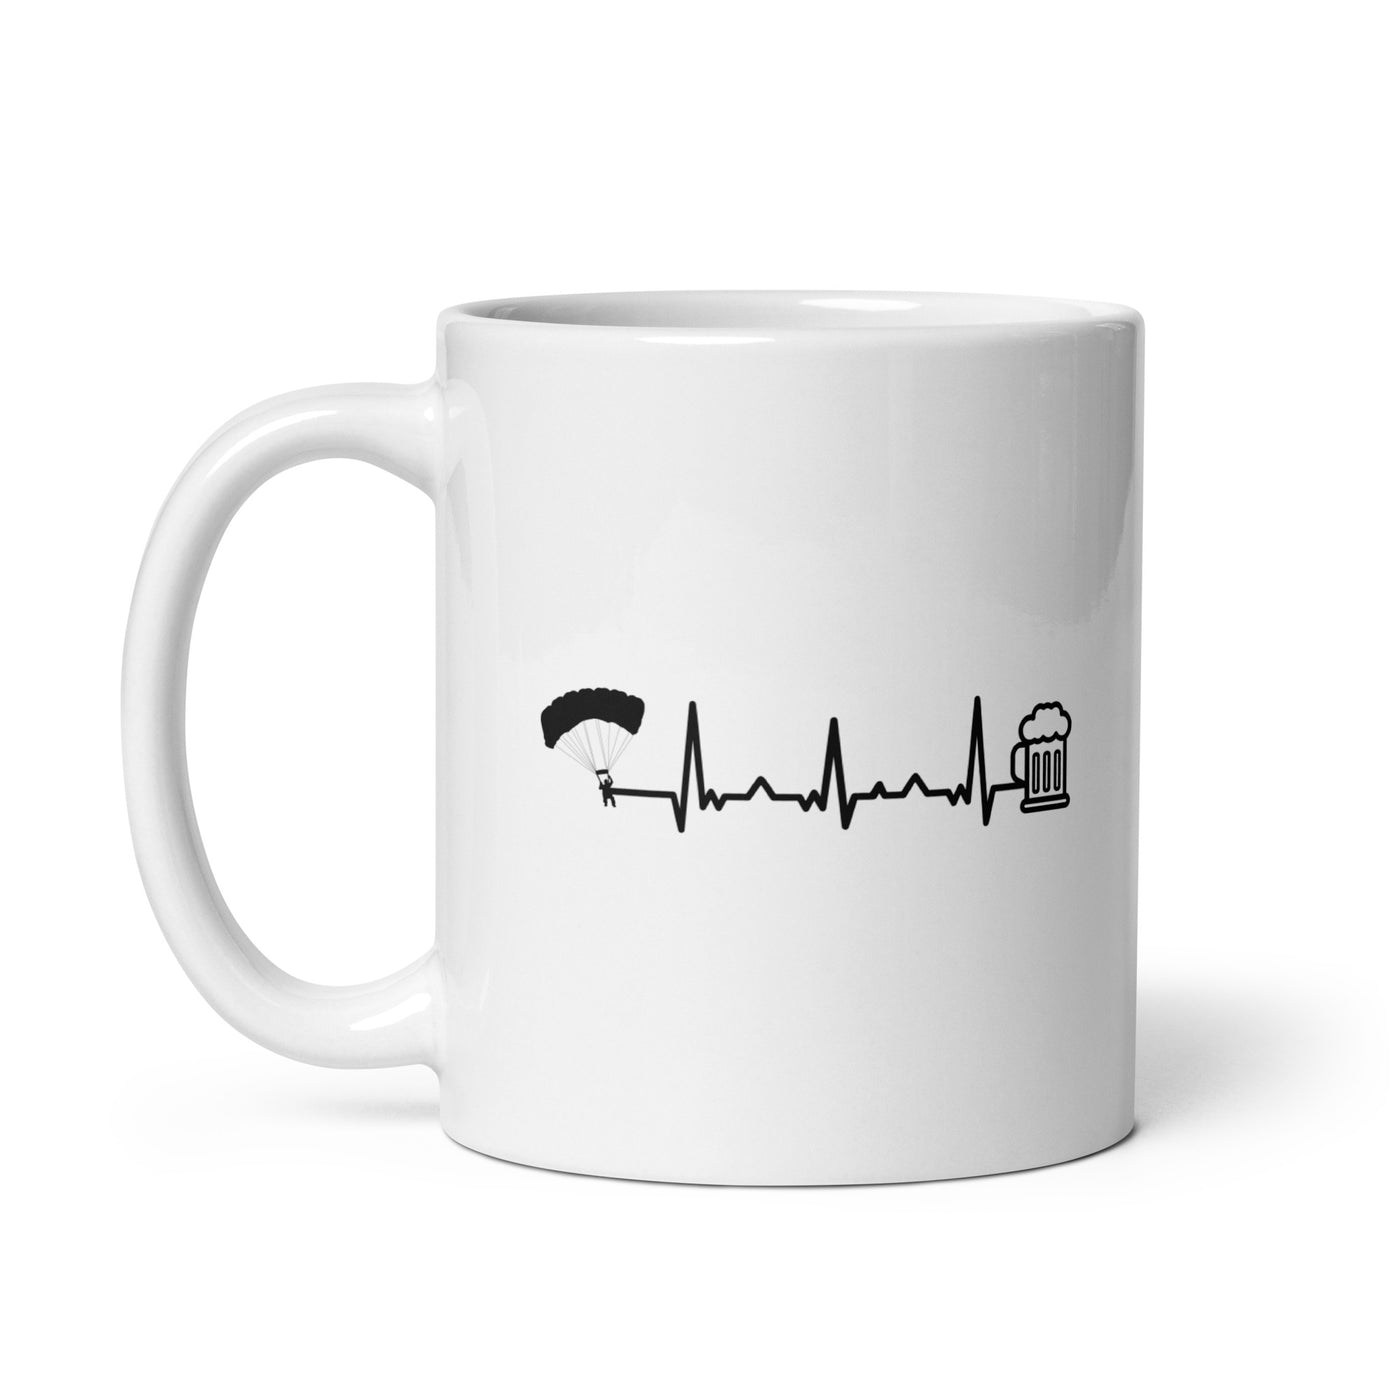 Heartbeat Beer And Paragliding - Tasse berge 11oz